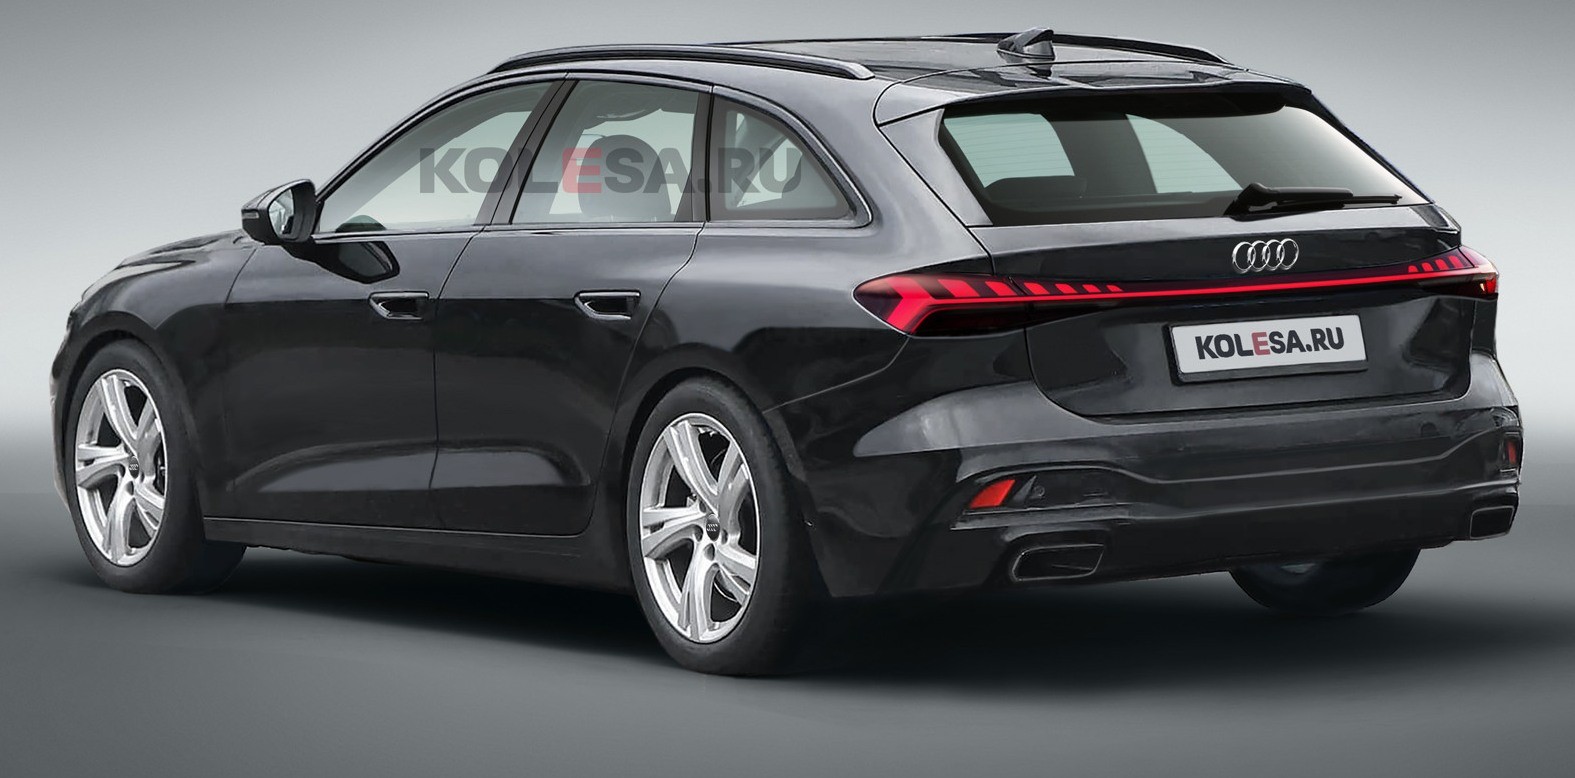 https://s1.cdn.autoevolution.com/images/news/gallery/unofficially-revealed-audi-a5-avant-looks-like-a-wagon-you-want-instead-of-a-bmw-or-merc_3.jpg